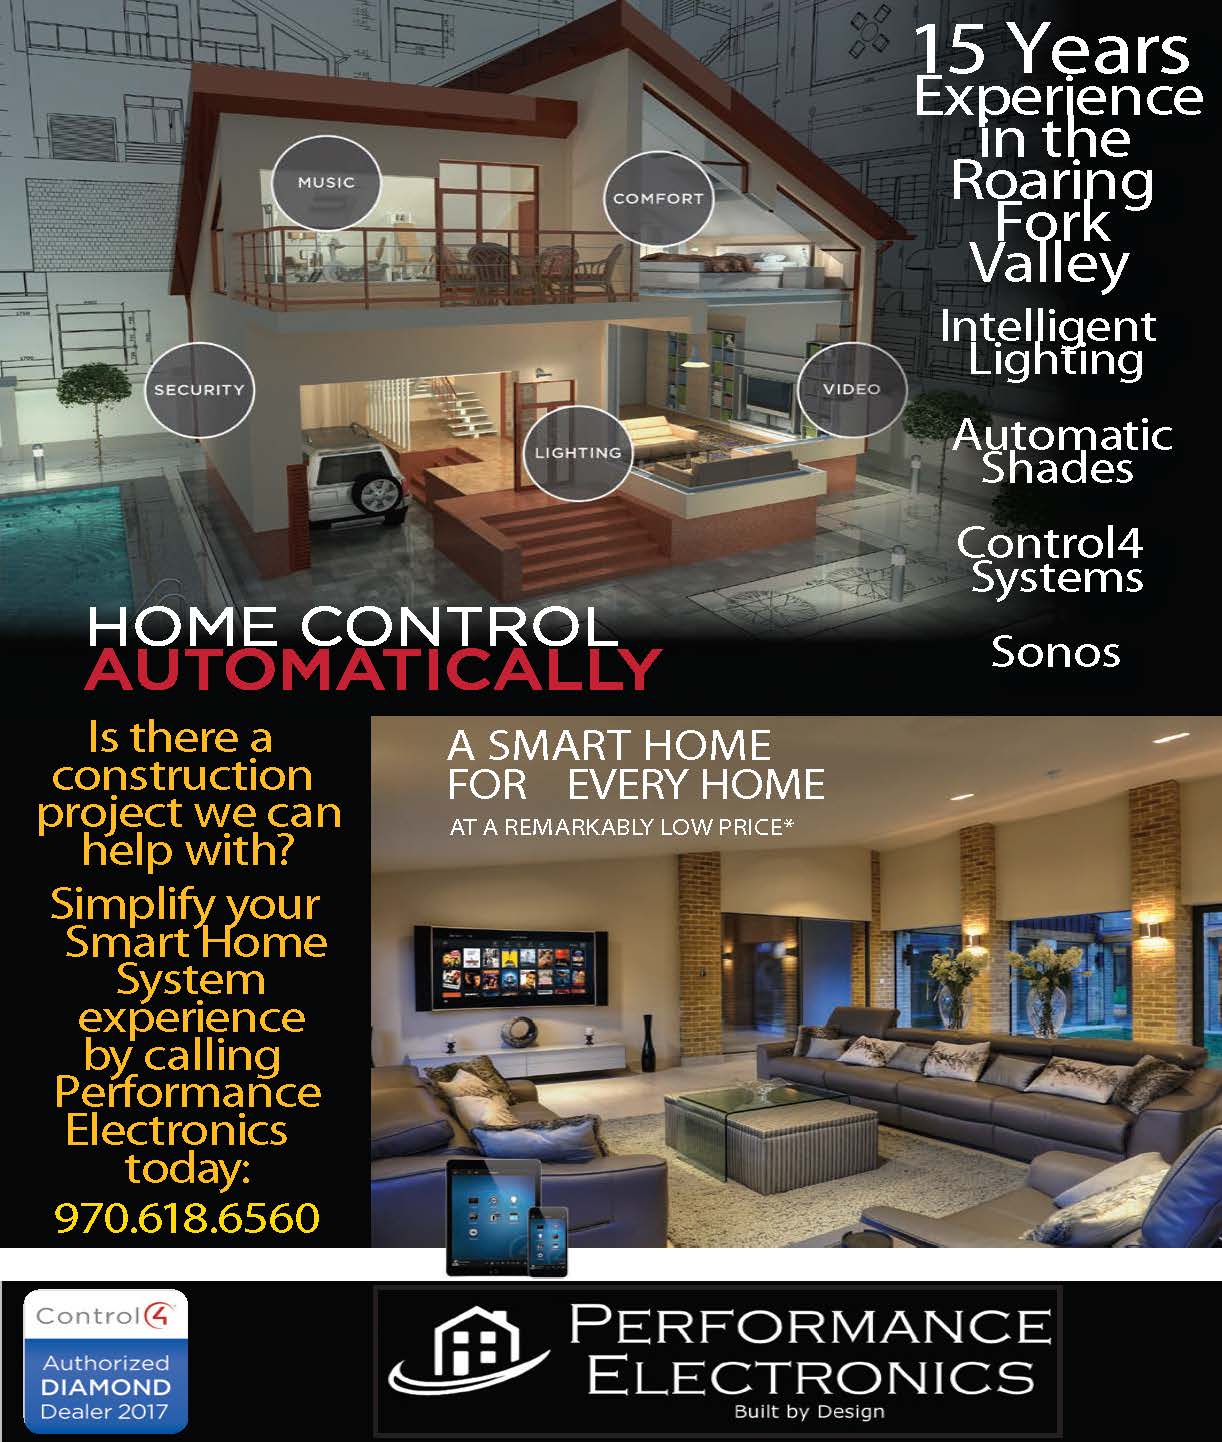 "Home Control Automatically" poster design